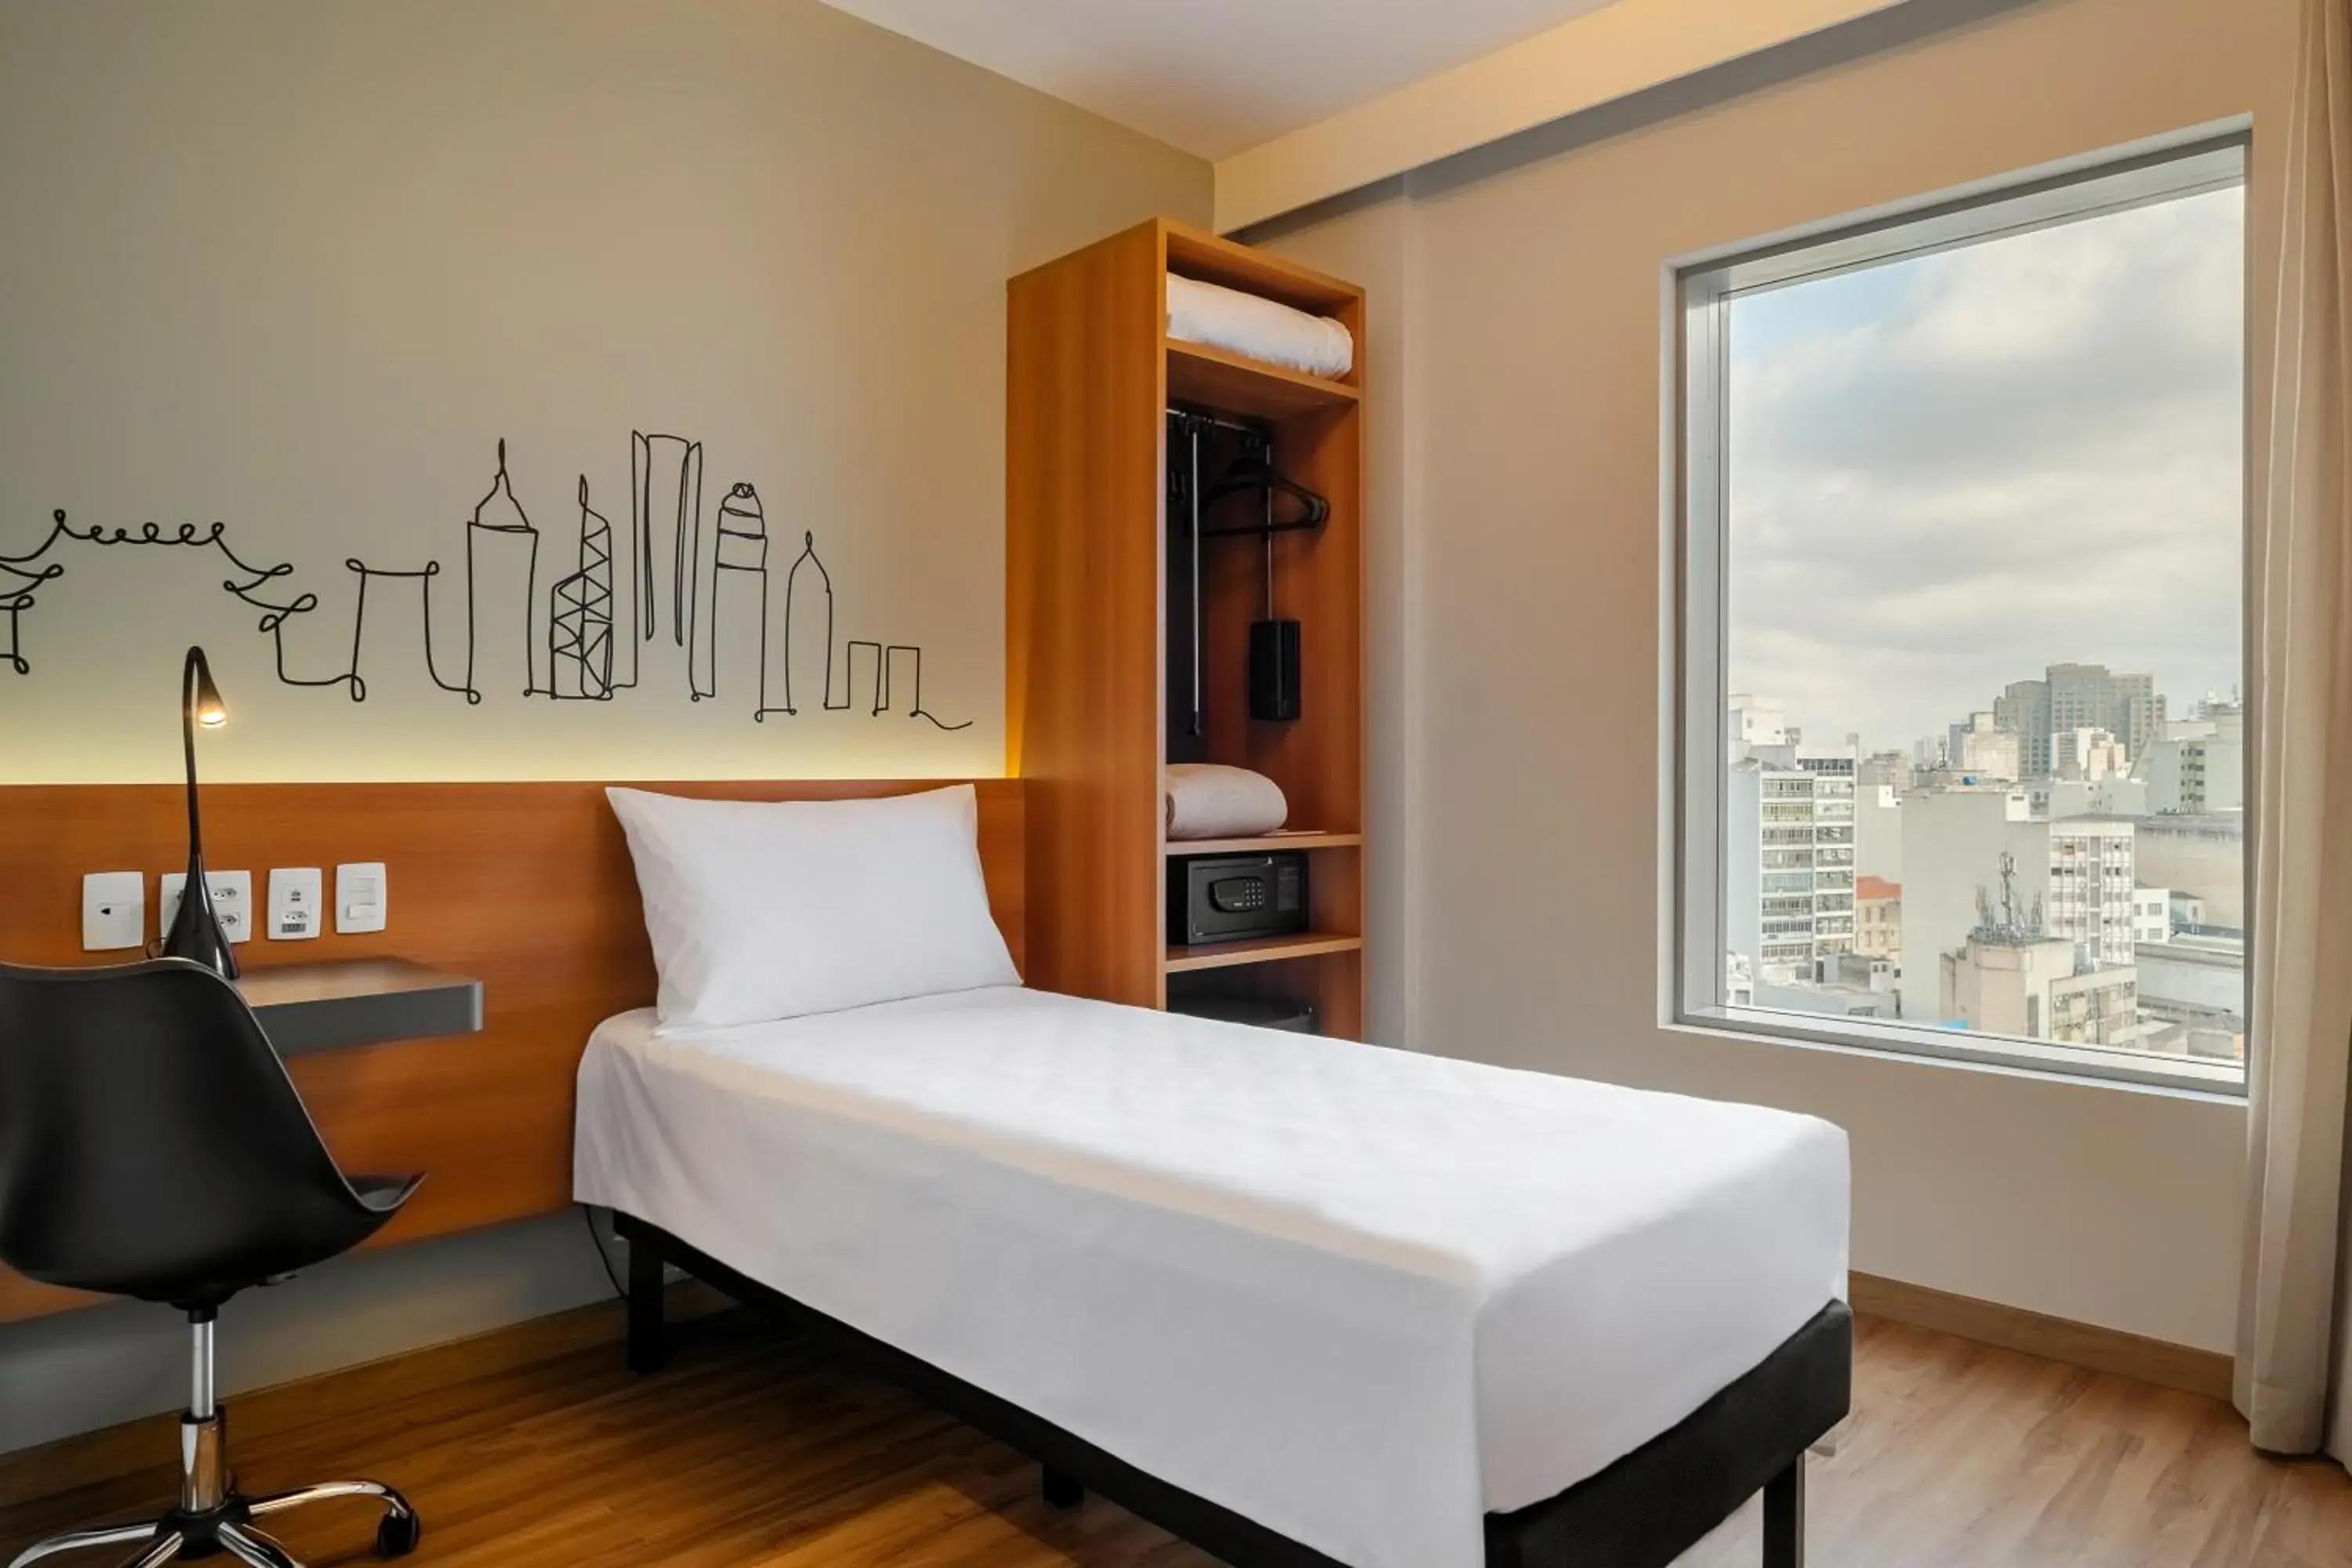 Facility for disabled guests, Bed in ibis Styles SP Centro